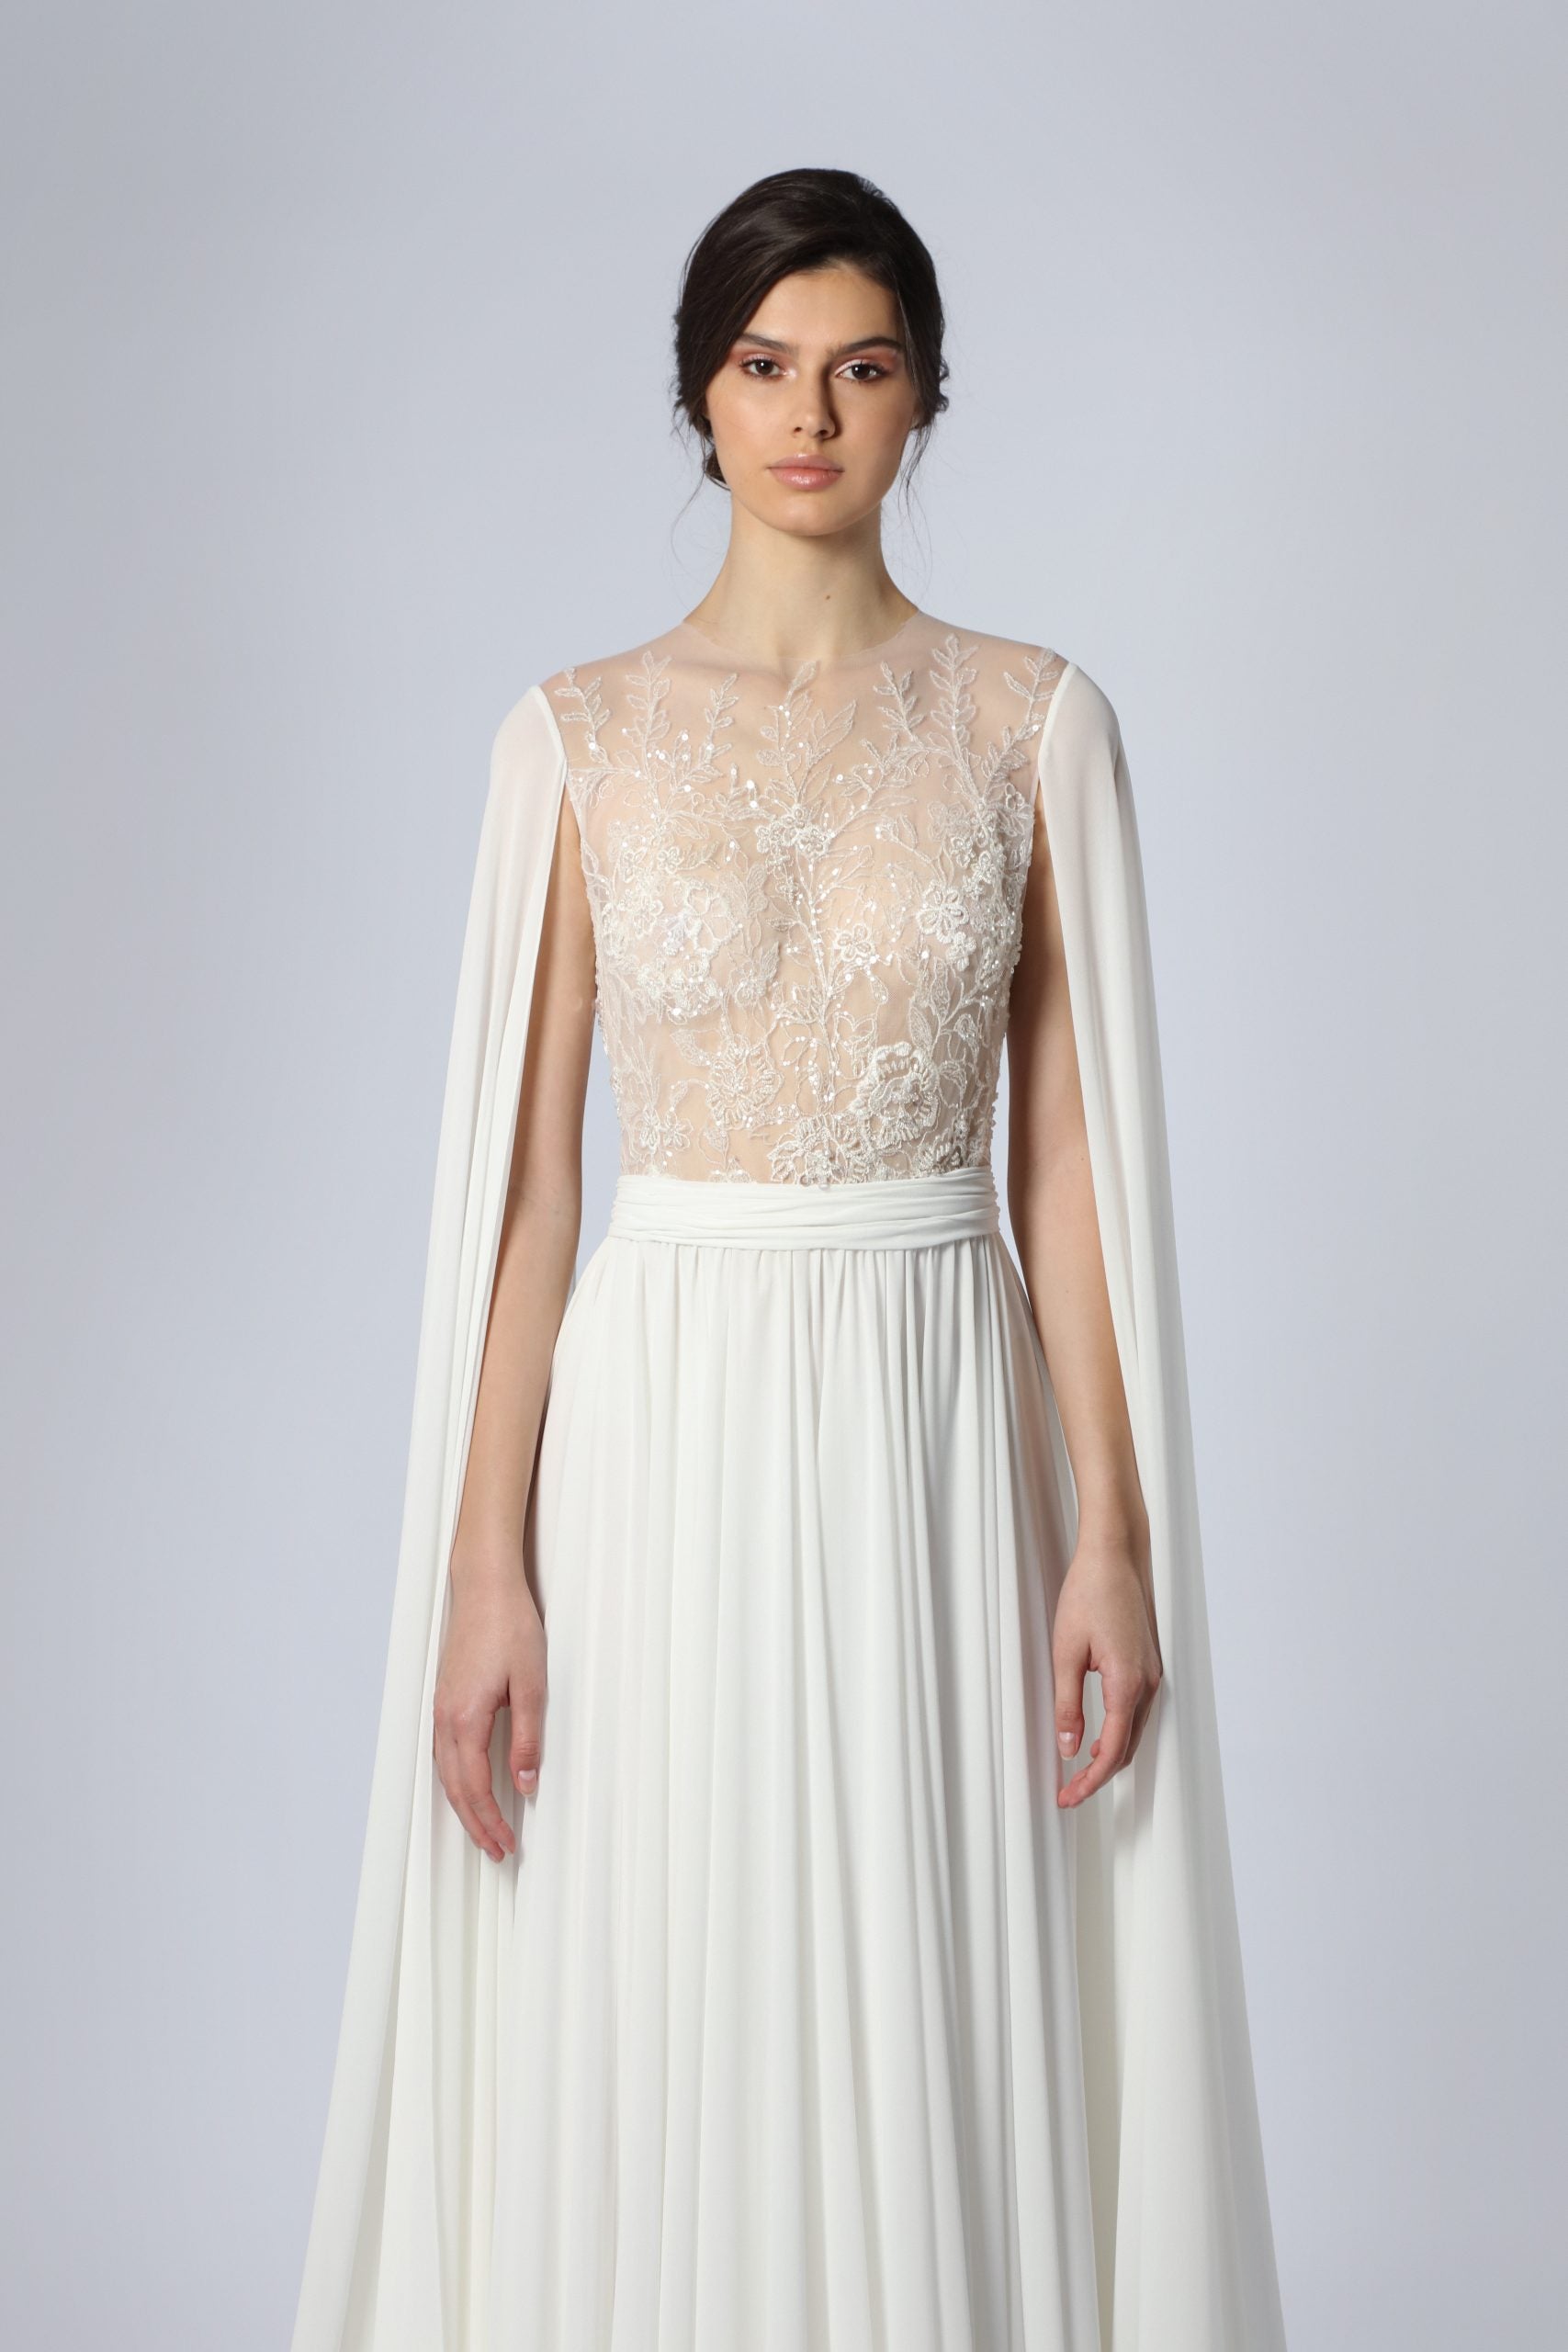 Ethereal A-Line Gown With Cape by Tony Ward - Image 2